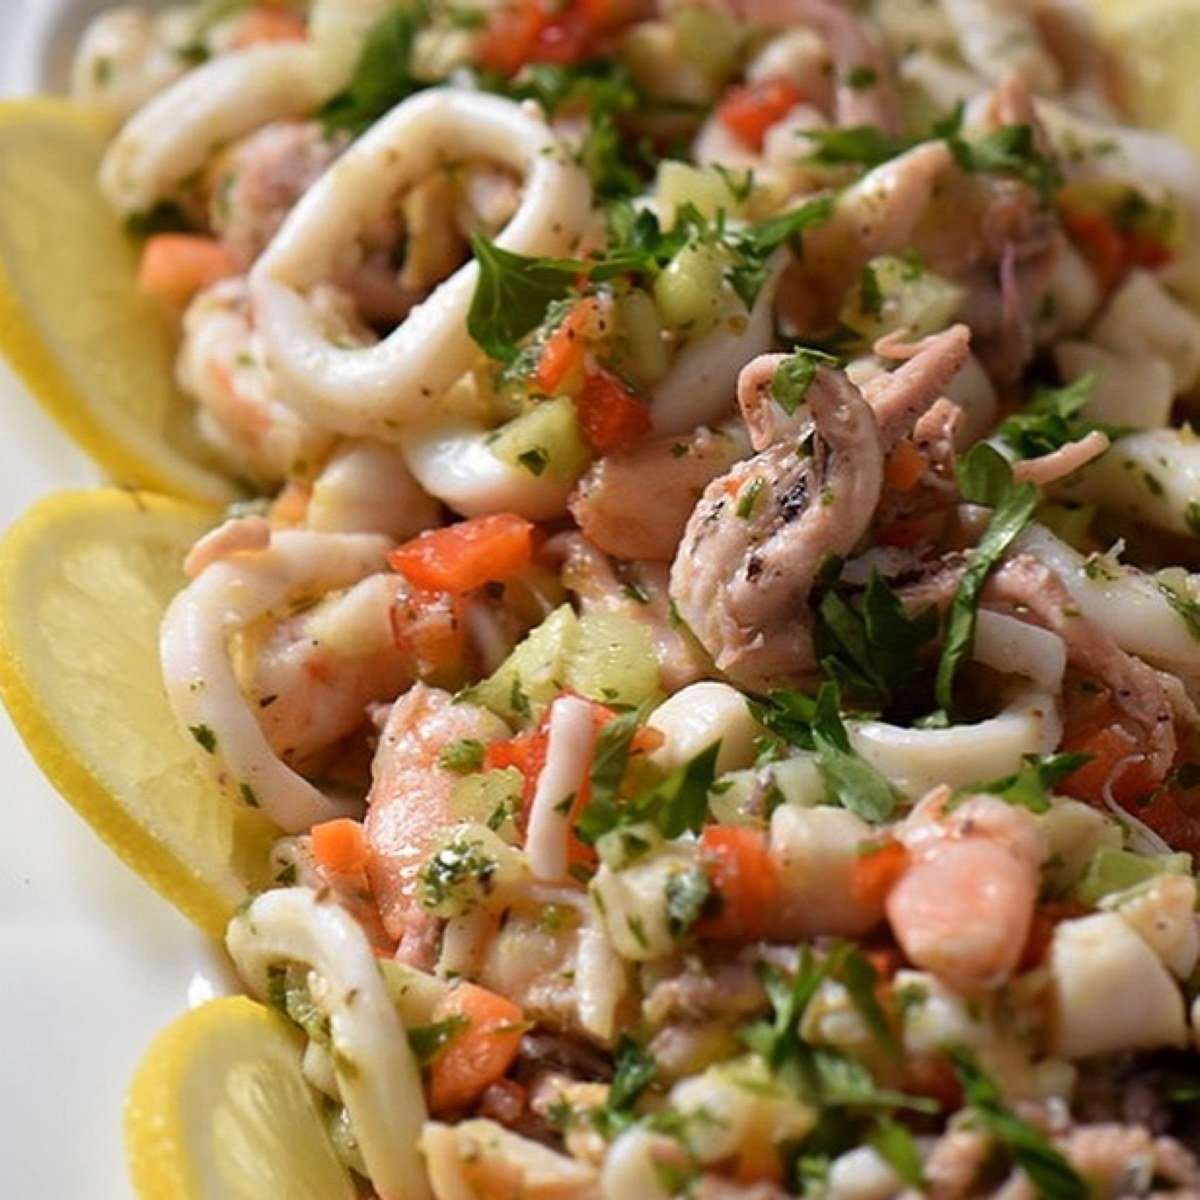 The calamari rings are spotted in this Italian Christmas Eve appetizer, seafood salad.